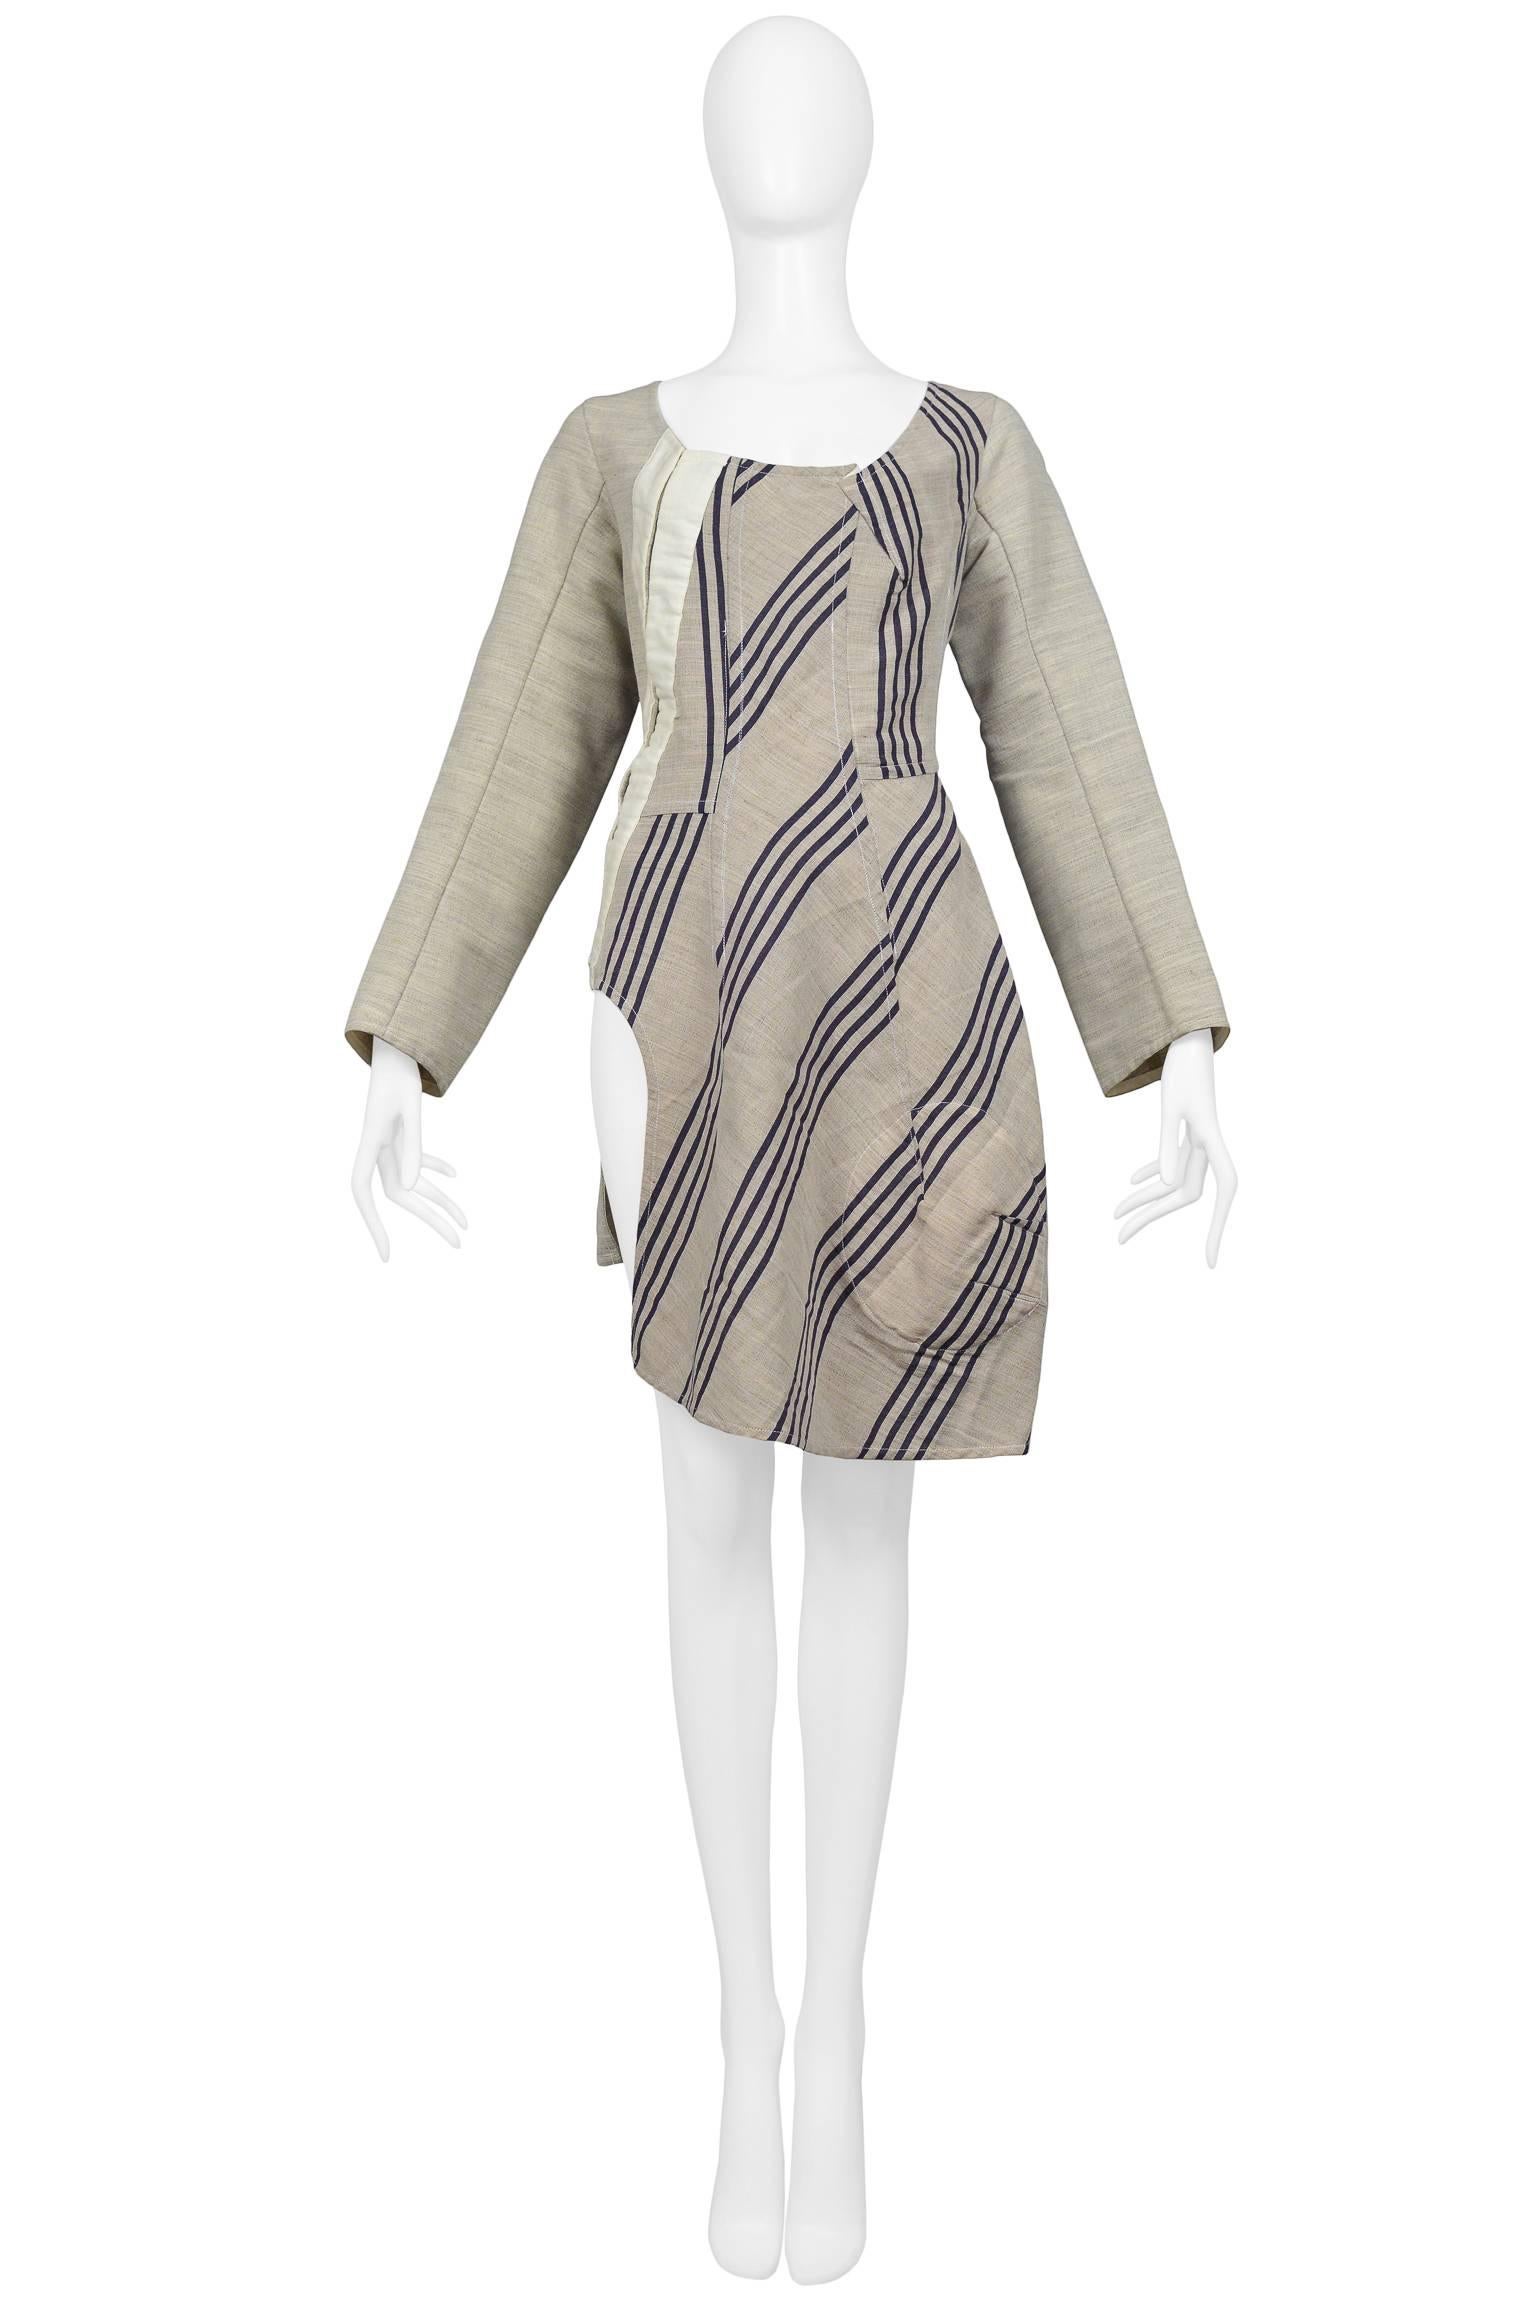 Vintage Comme des Garcons natural tone silk deconstructed tunic with navy stripe panels. The tunic top features muslin type tape with hook and eye closures at side dart. The tunic has long sleeves, an open scoop neckline, and asymmetrical hem. Shown